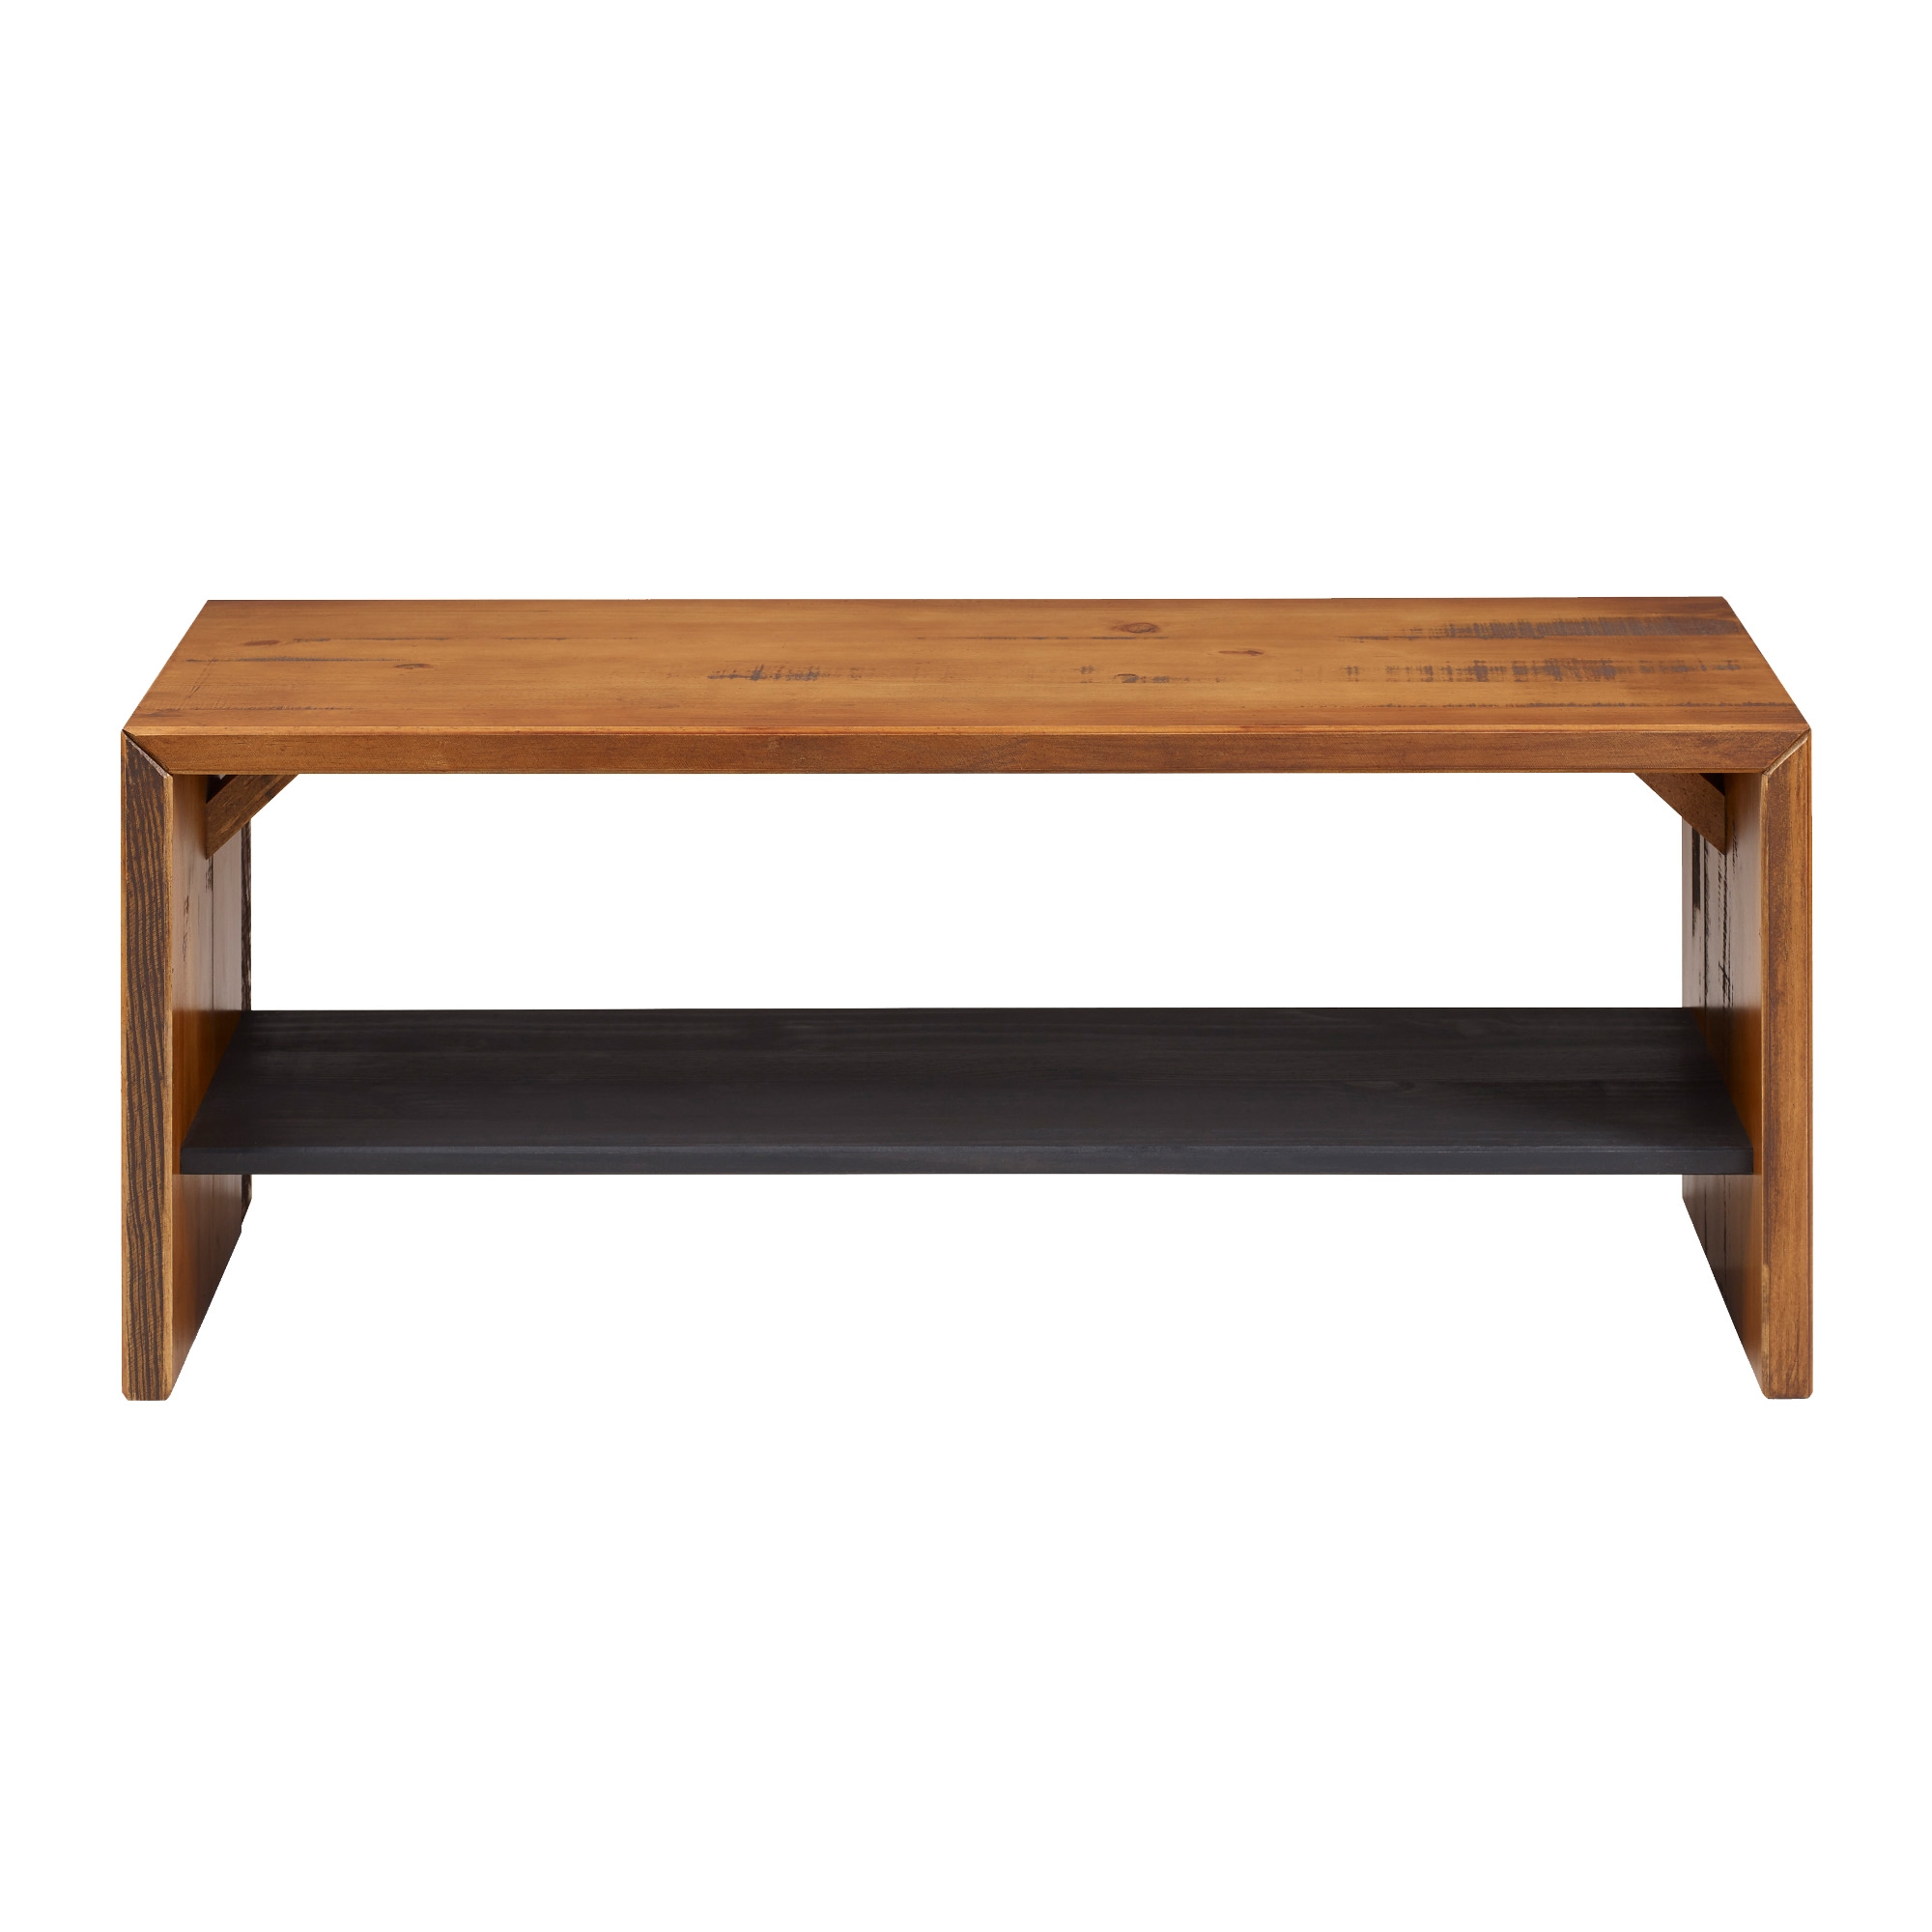 Alpine 42" Rustic Two-Tone Solid Wood Entry Bench - Amber - Image 1